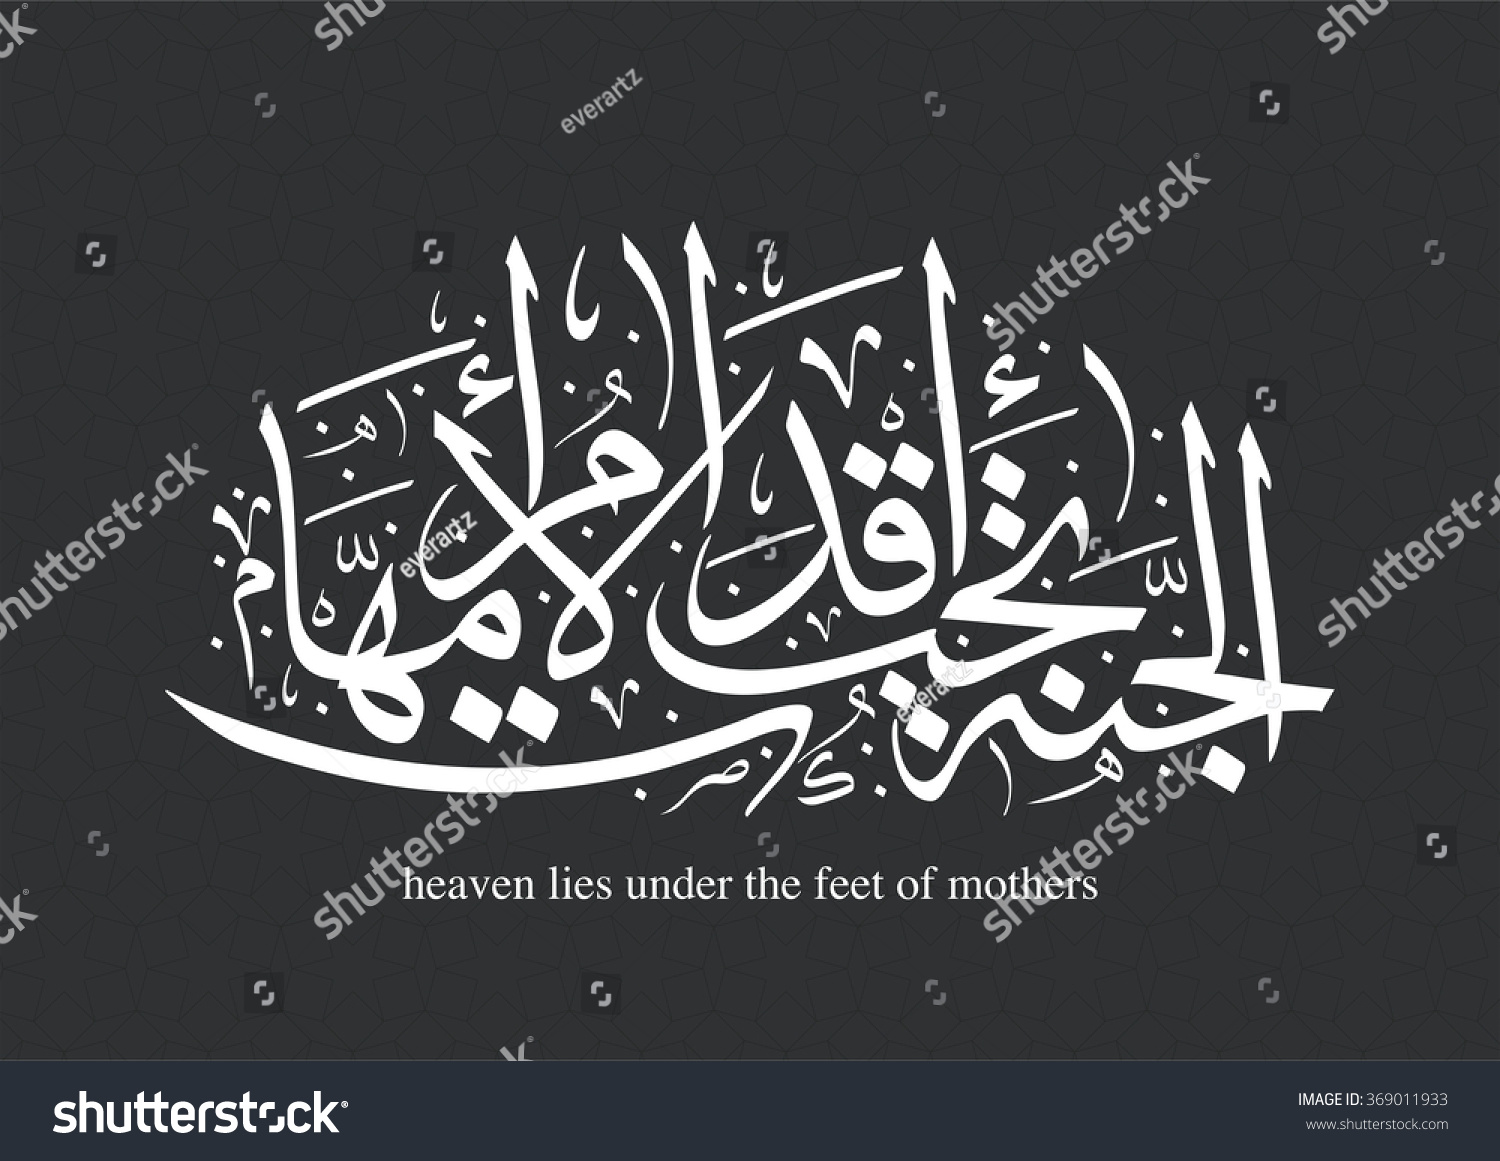 arabic calligraphy reads, (heaven lies under the feet on mothers) #369011933